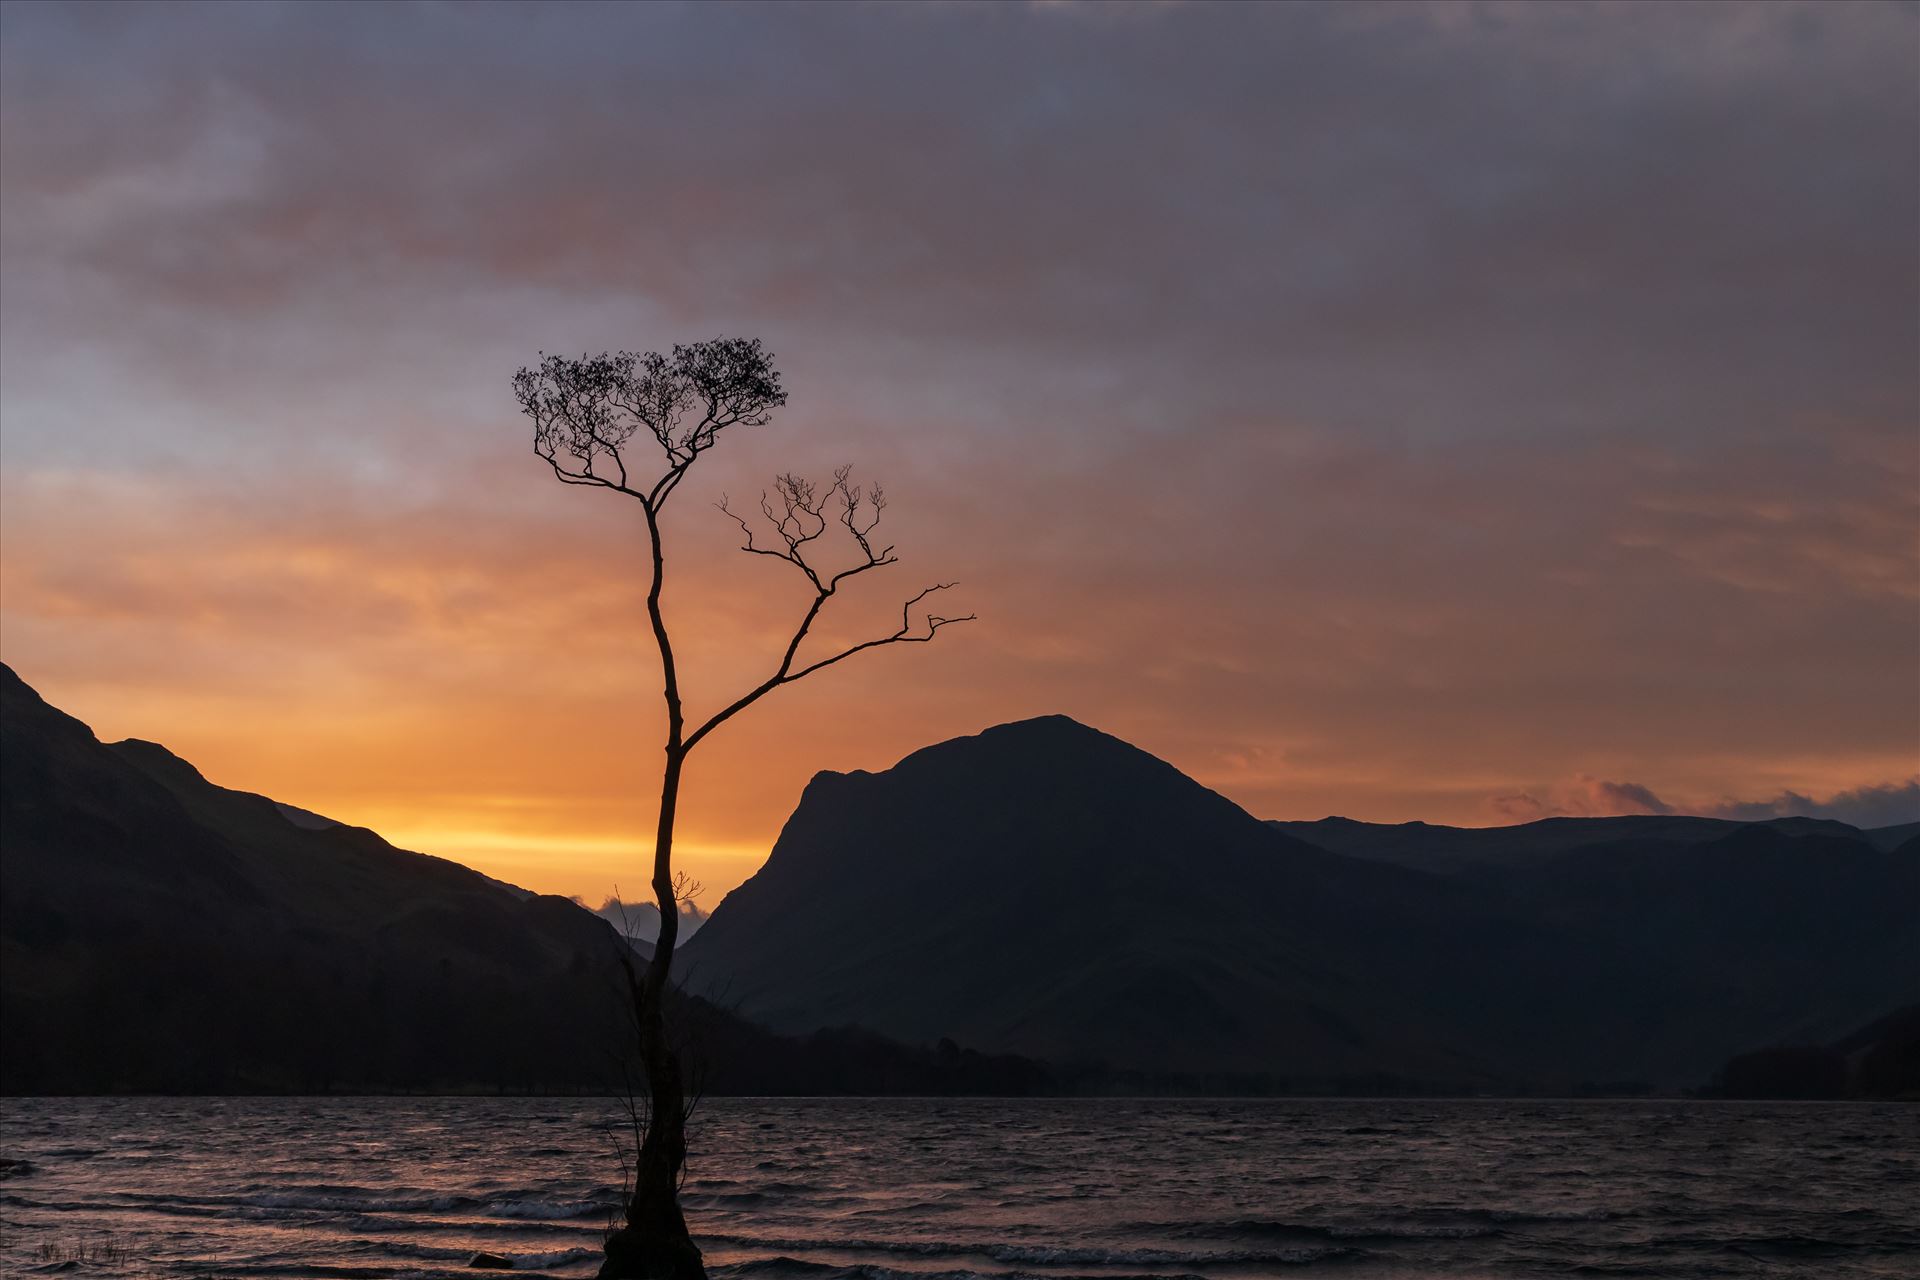 Sunrise at the Lone Tree at Buttermere The famous Lone Tree at Buttermere in the Lake District in Cumbria with Haystacks, Fleetwith Pike and Red Pike across the other side of the lake.  by Tony Keogh Photography